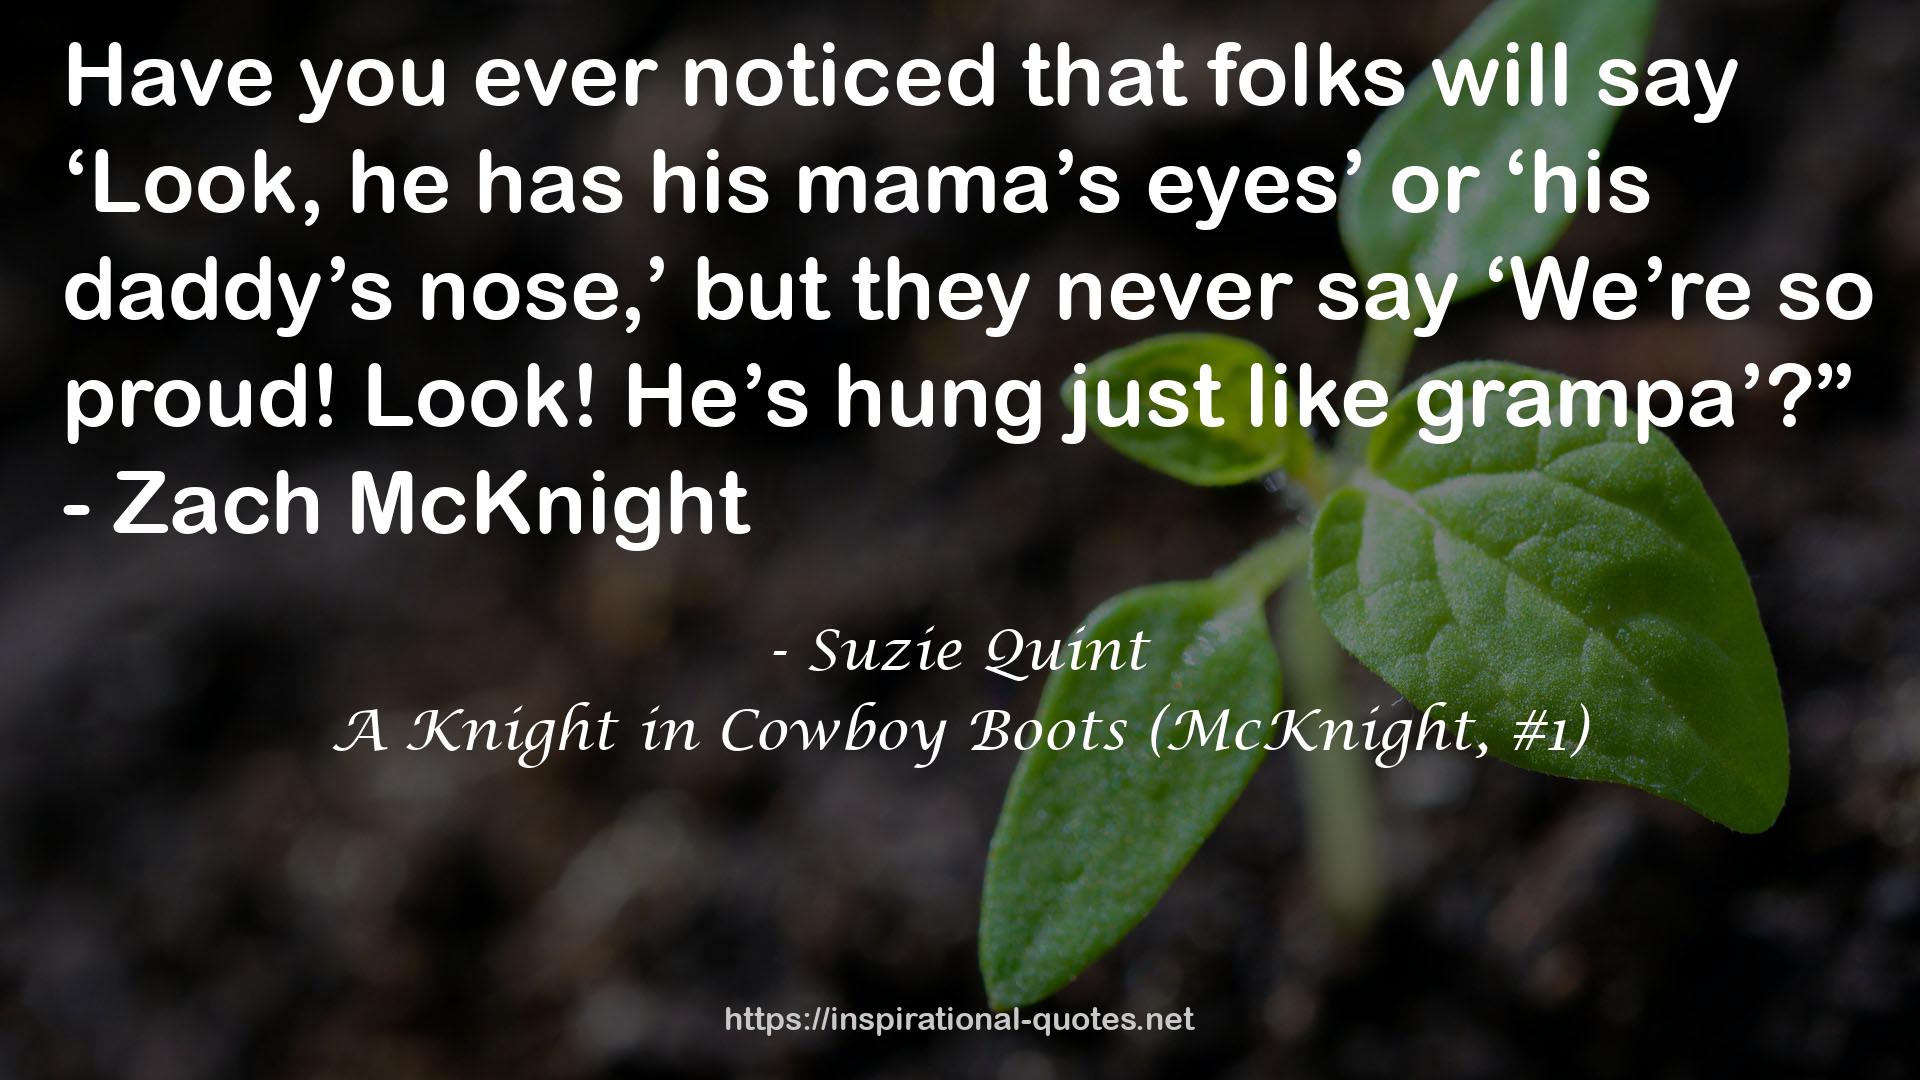 A Knight in Cowboy Boots (McKnight, #1) QUOTES